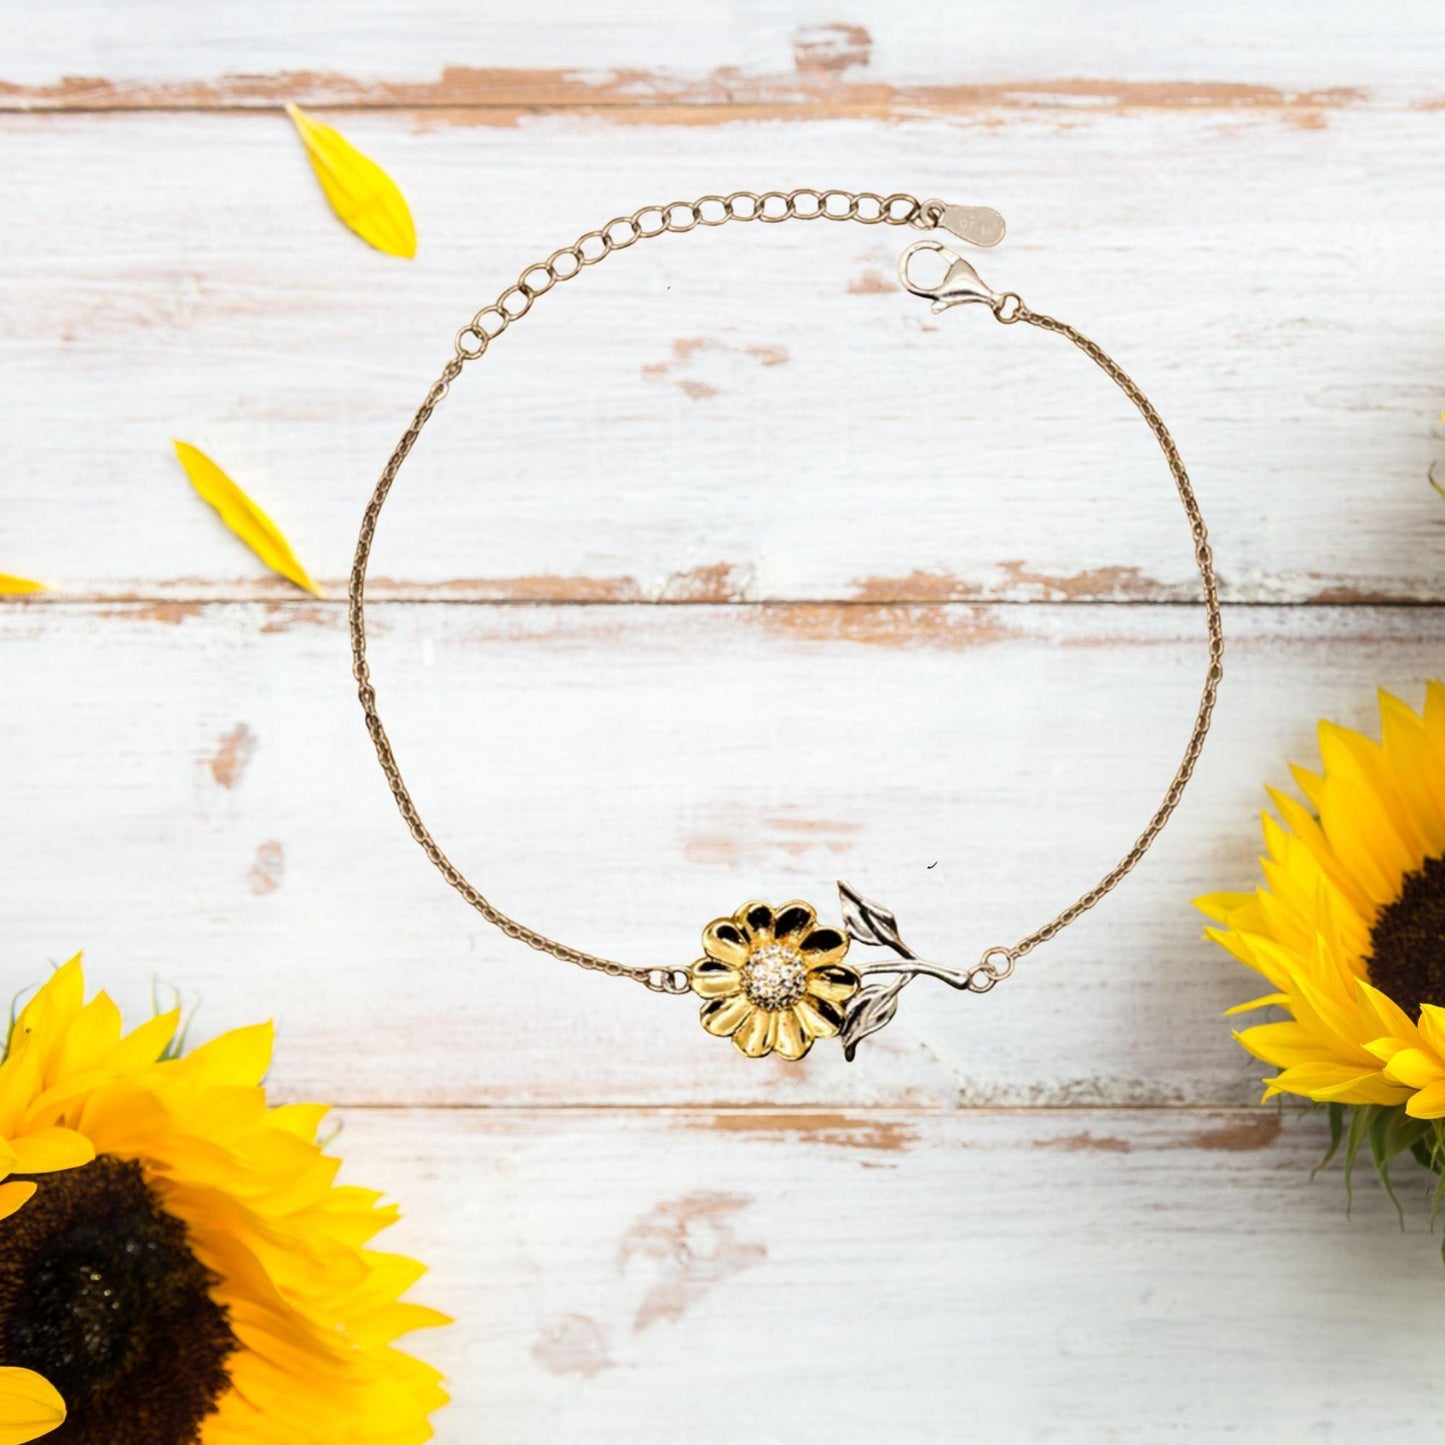 Sunflower Bracelet for Godson Present, Godson Always follow your dreams, never forget how amazing you are, Godson Birthday Christmas Gifts Jewelry for Girls Boys Teen Men Women - Mallard Moon Gift Shop